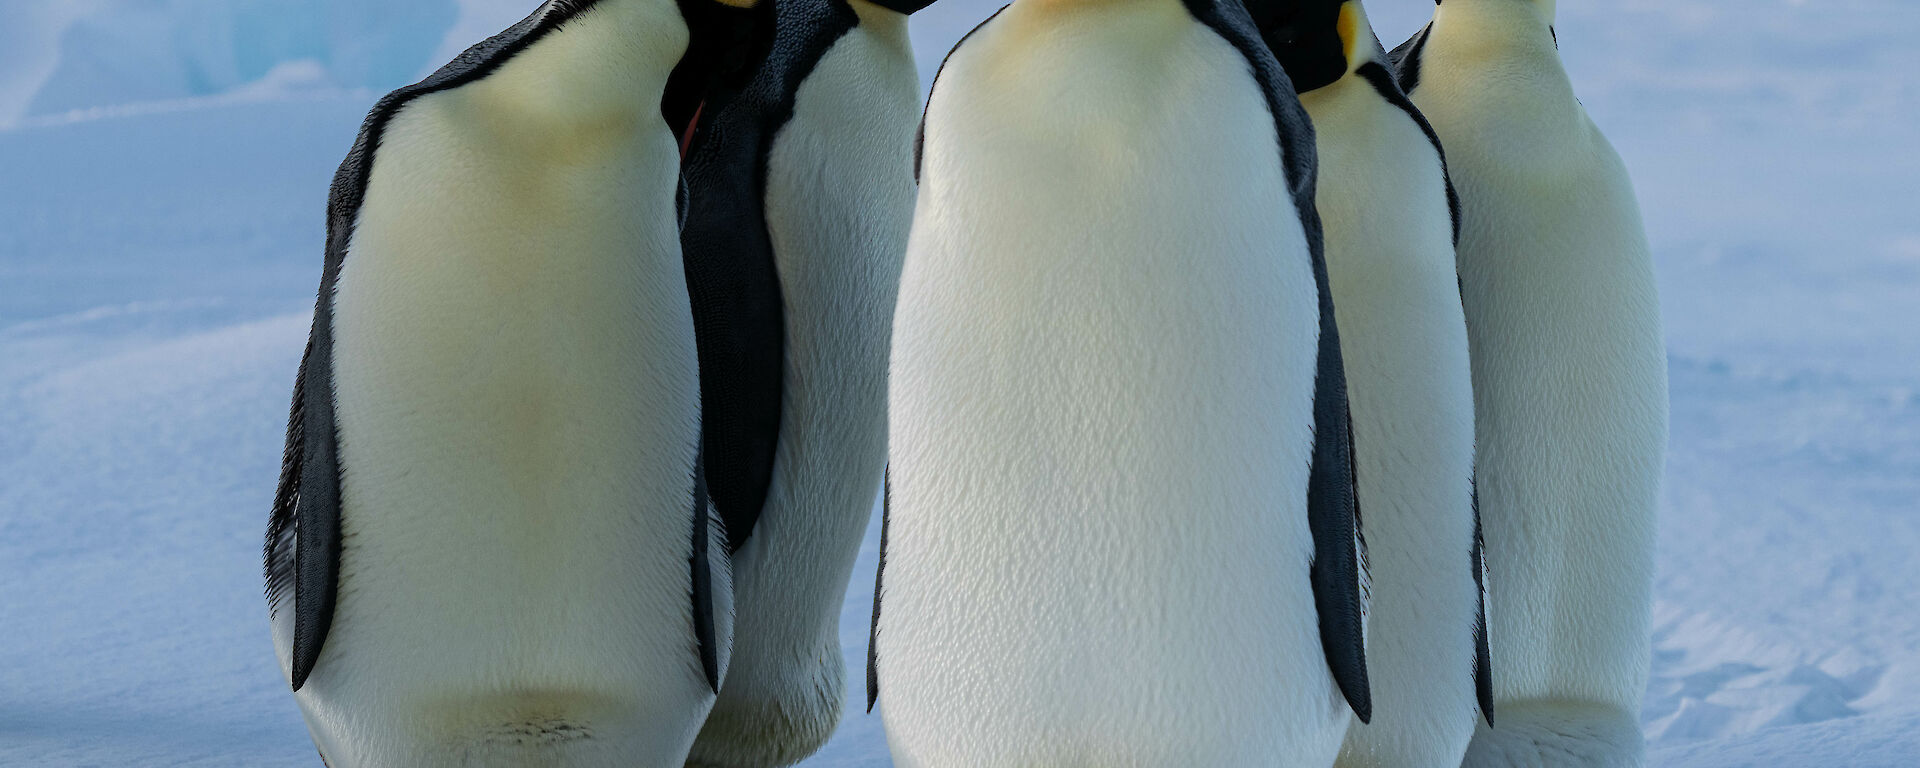 Five penguins are together in a huddle with one slightly closer to the camera. There are large icebergs in the distance.